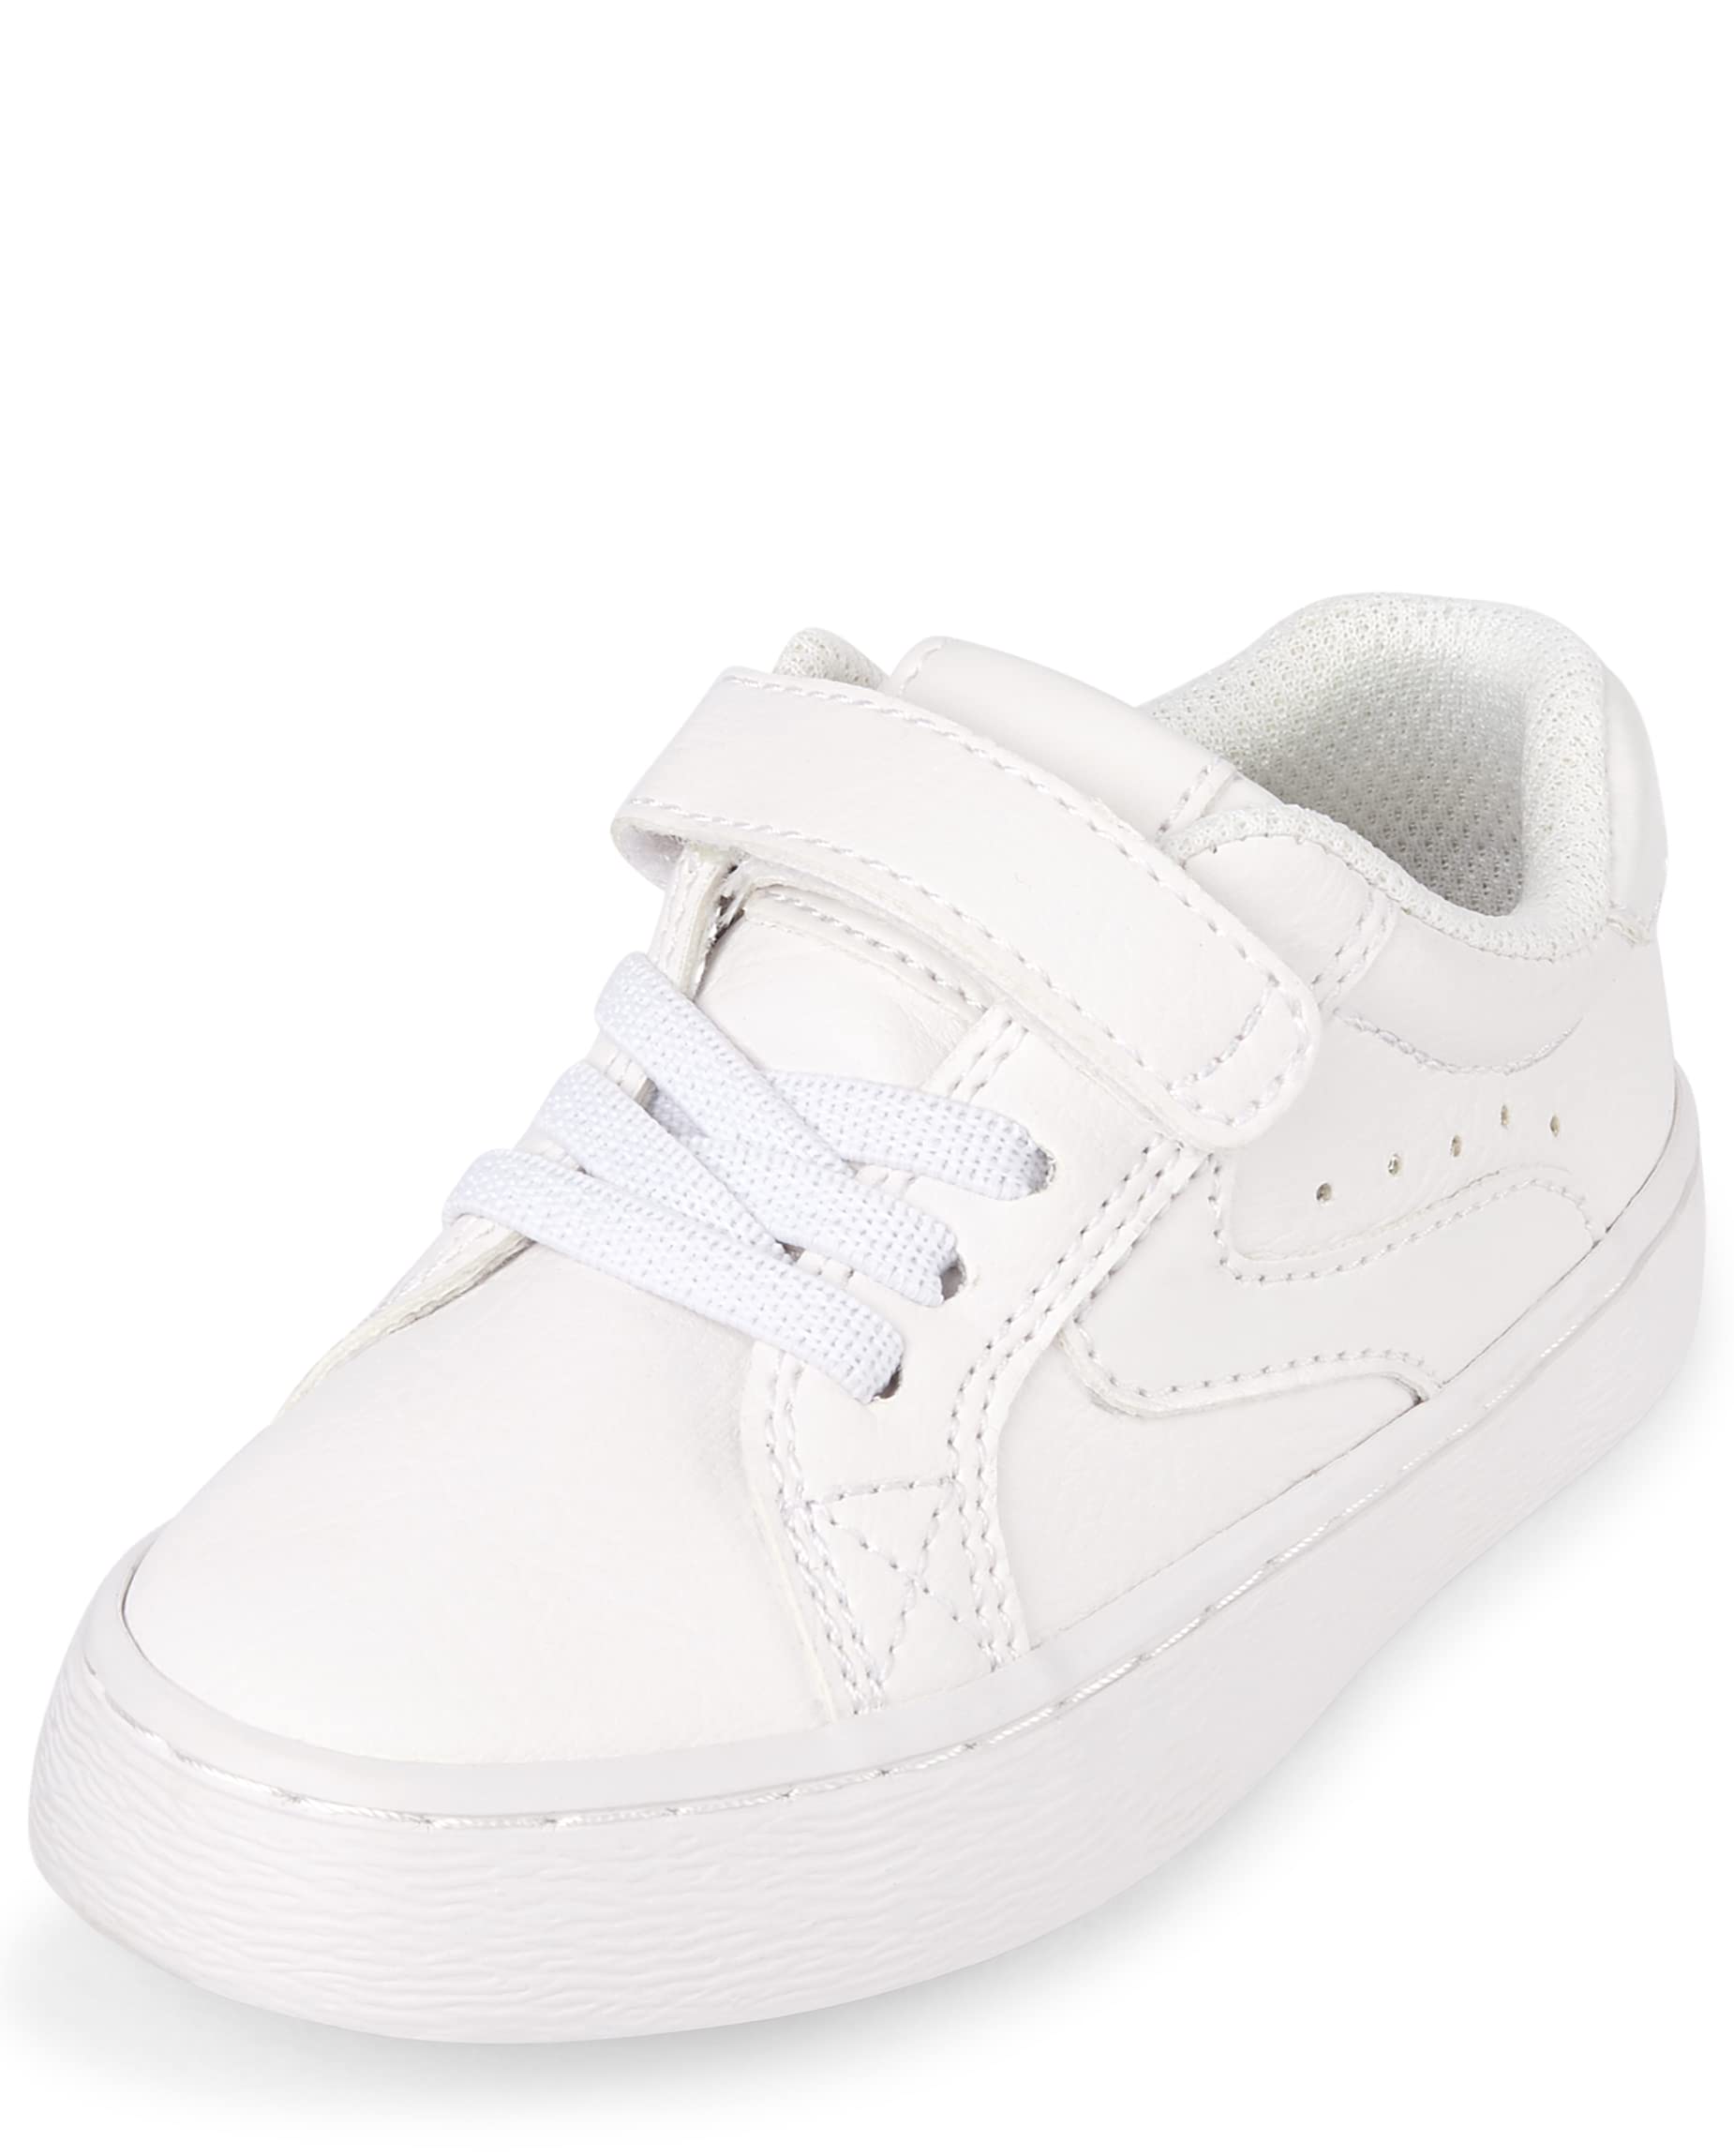 The Children's Place,boys,The Children's Place Toddler Boys Low Top Sneakers,and Toddler Uniform Low Top Sneakers,White,7 Toddler